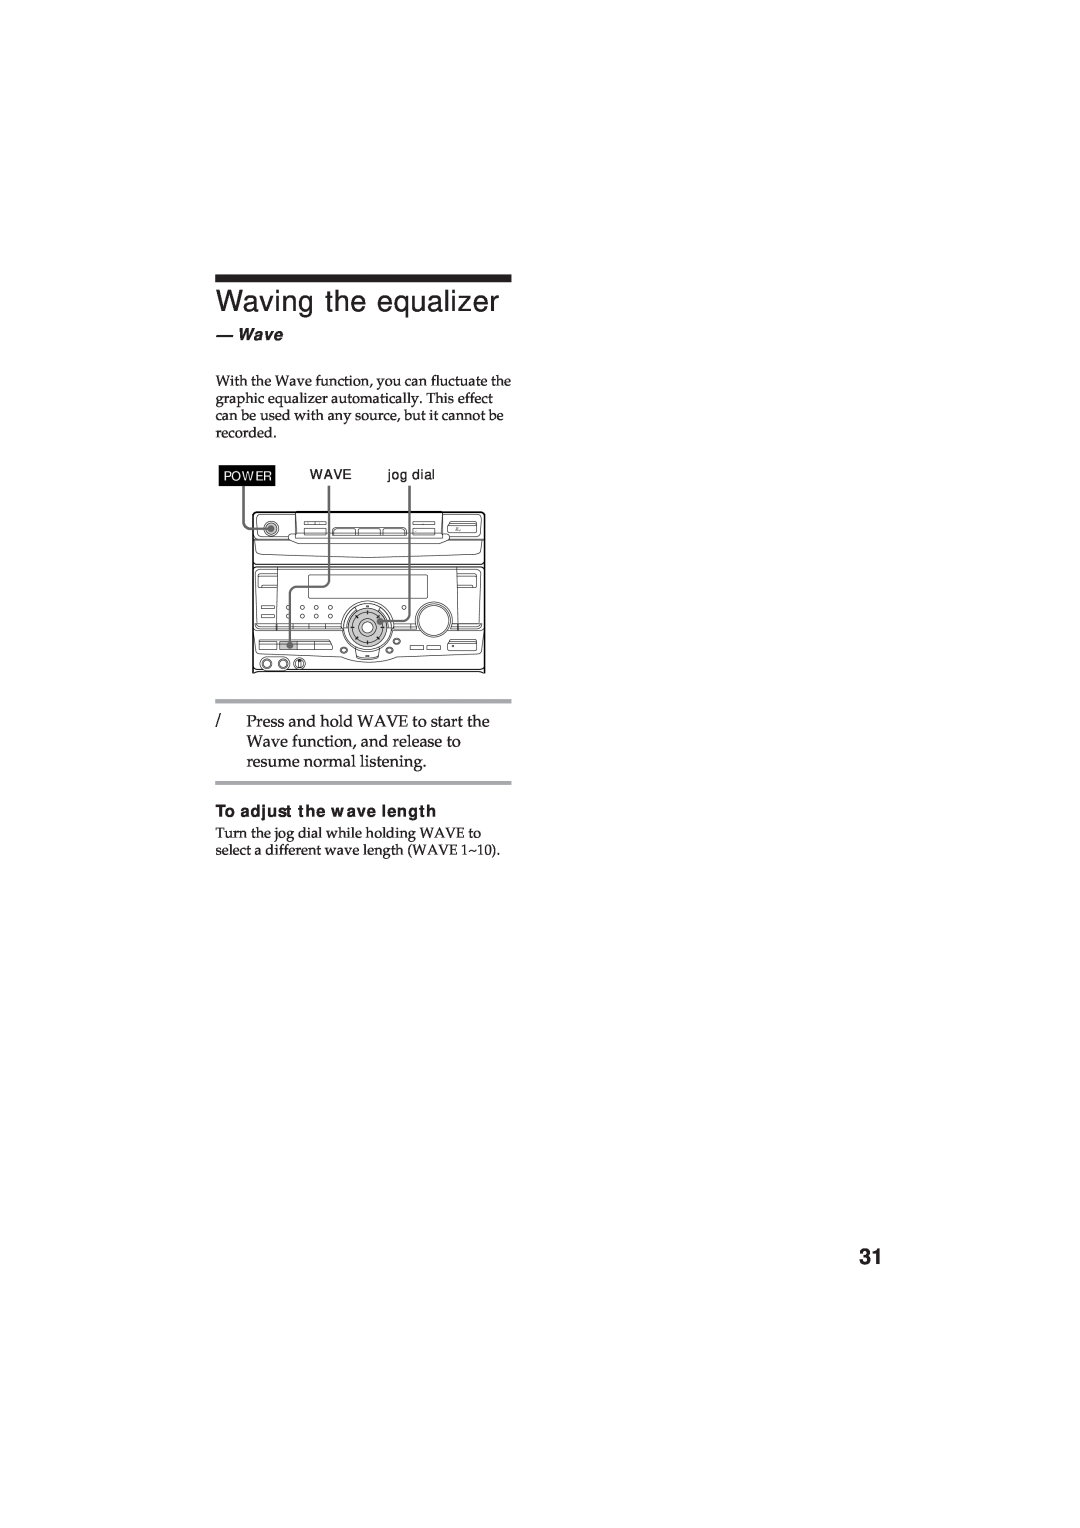 Sony MHC-D90AV, MHC-GR10AV operating instructions Waving the equalizer, Wave, To adjust the wave length 